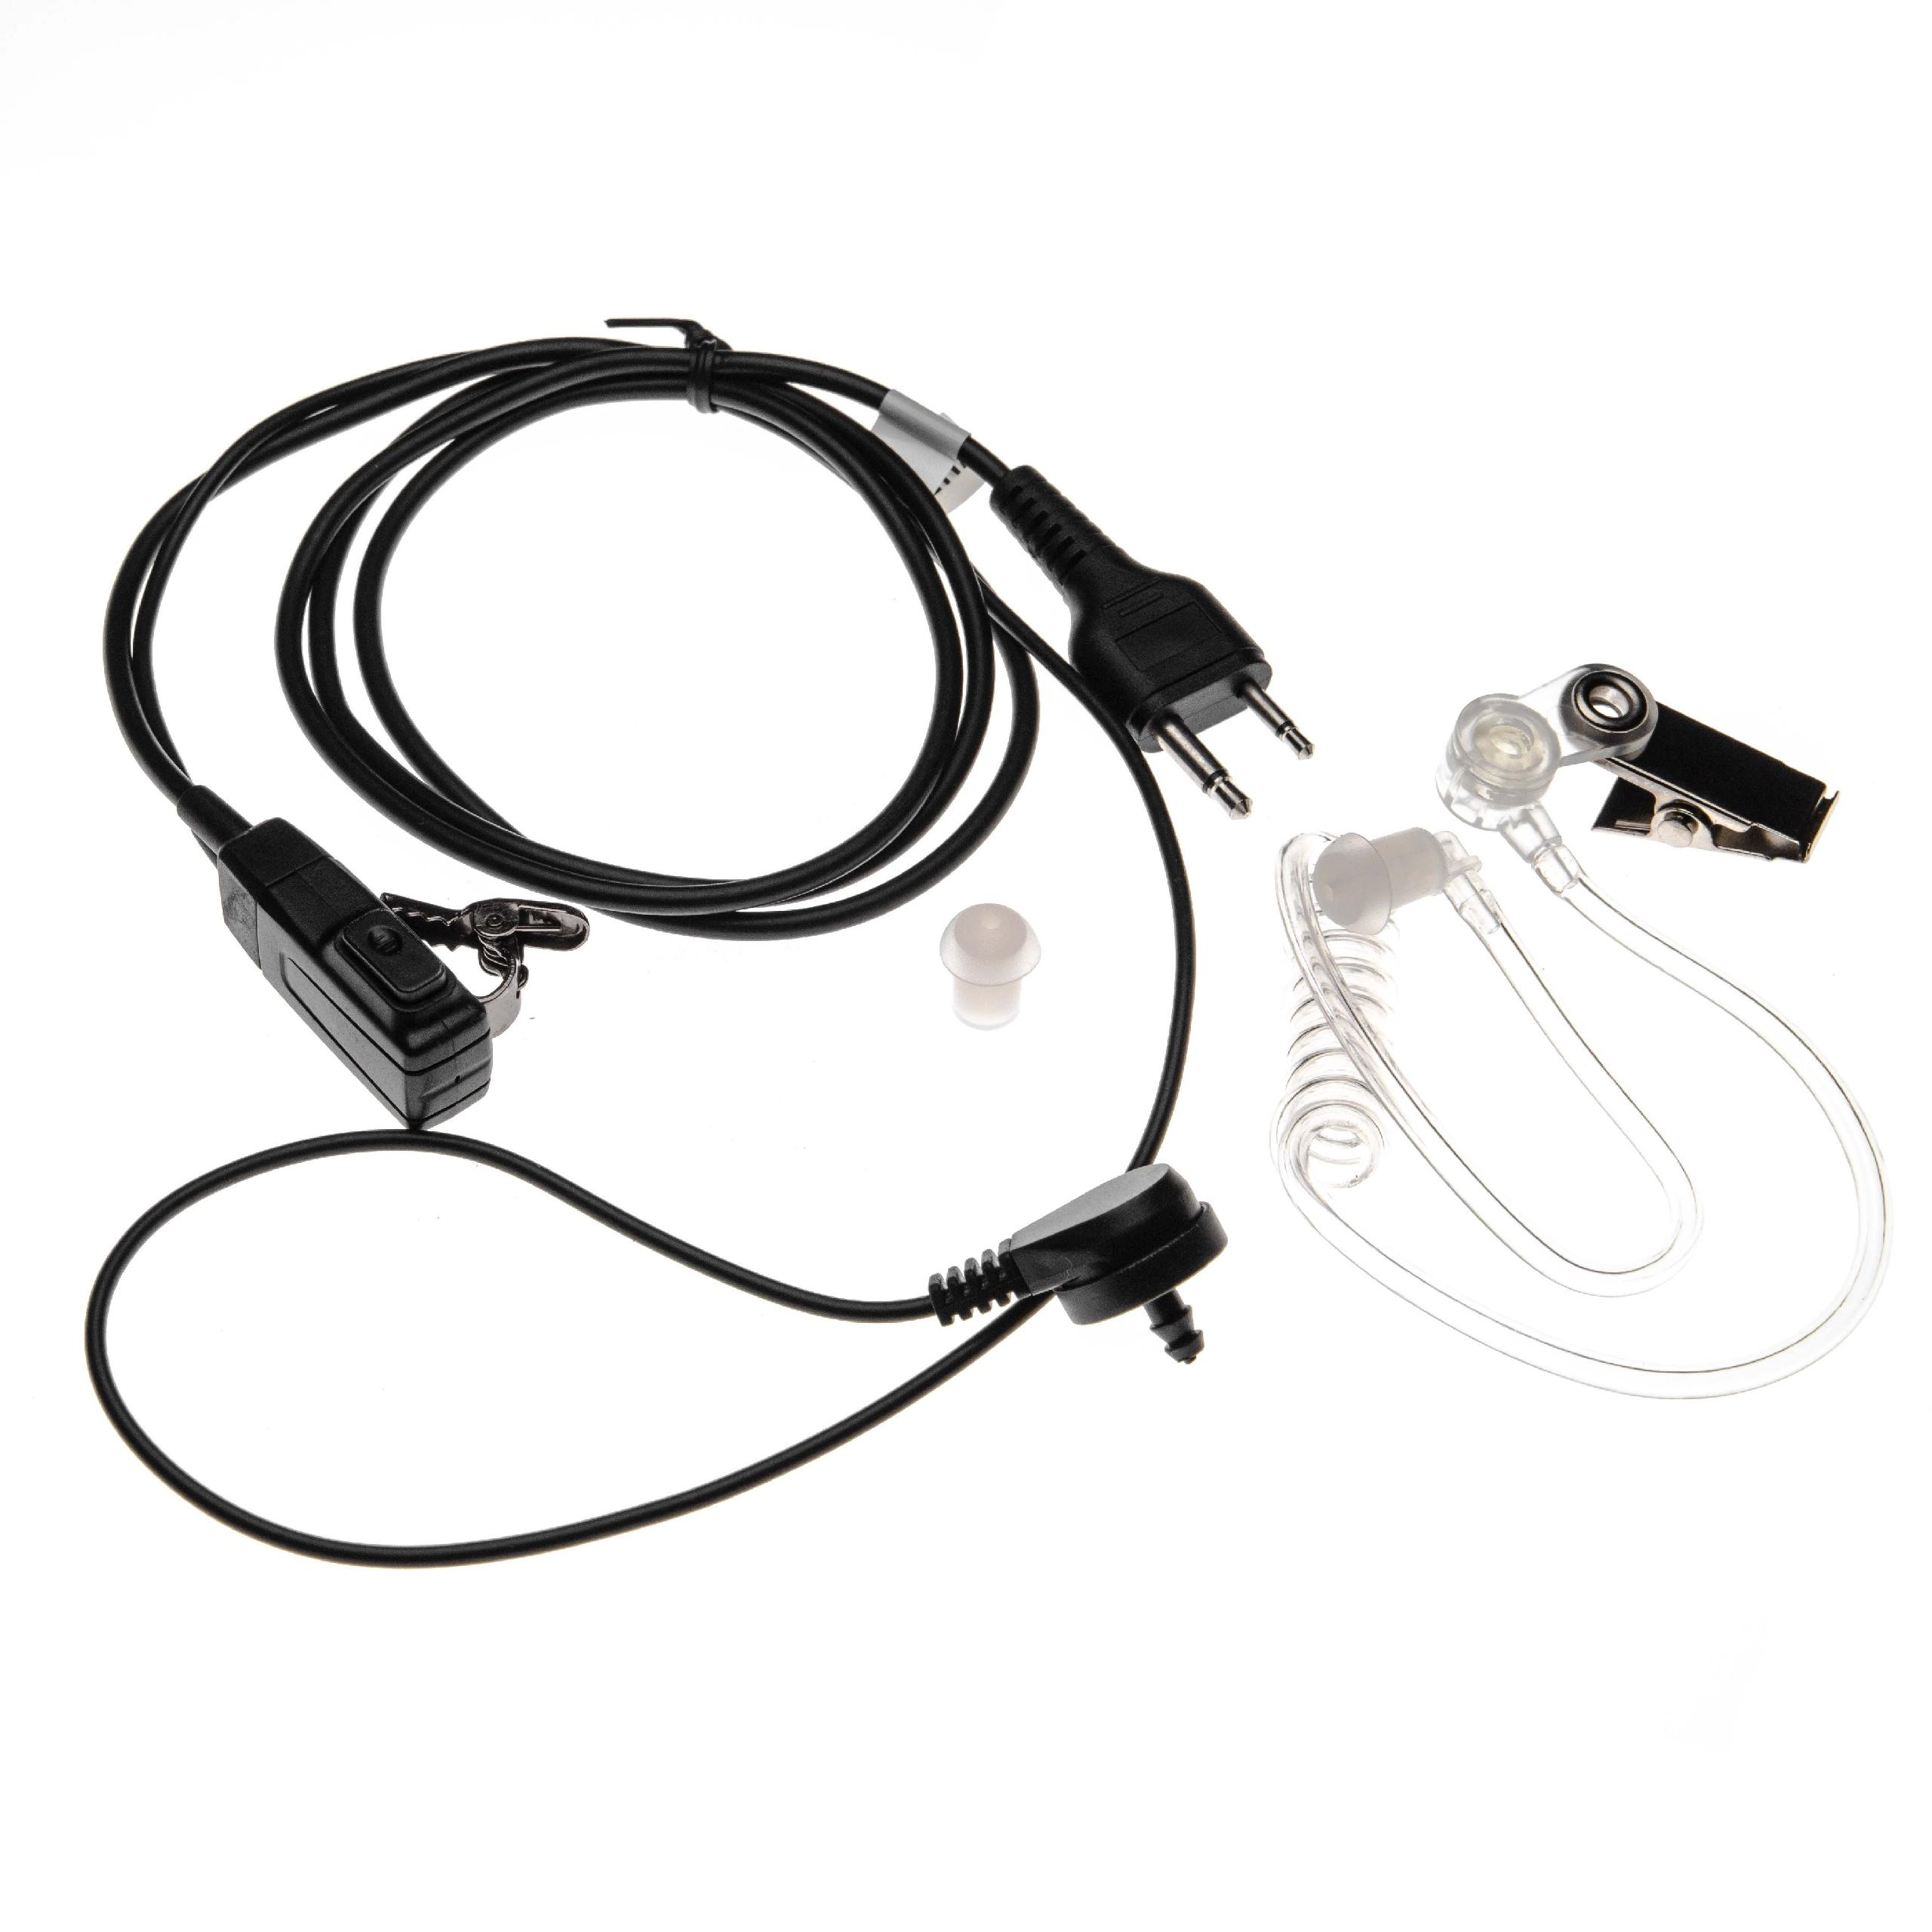 Headset IC-T7, mit schwarz transparent IC-T42, On-ear VHBW IC-T42E, IC-T41E, IC-T3H, / kompatibel IC-T41A, Icom IC-T2H, IC-T31CP, IC-T42A,